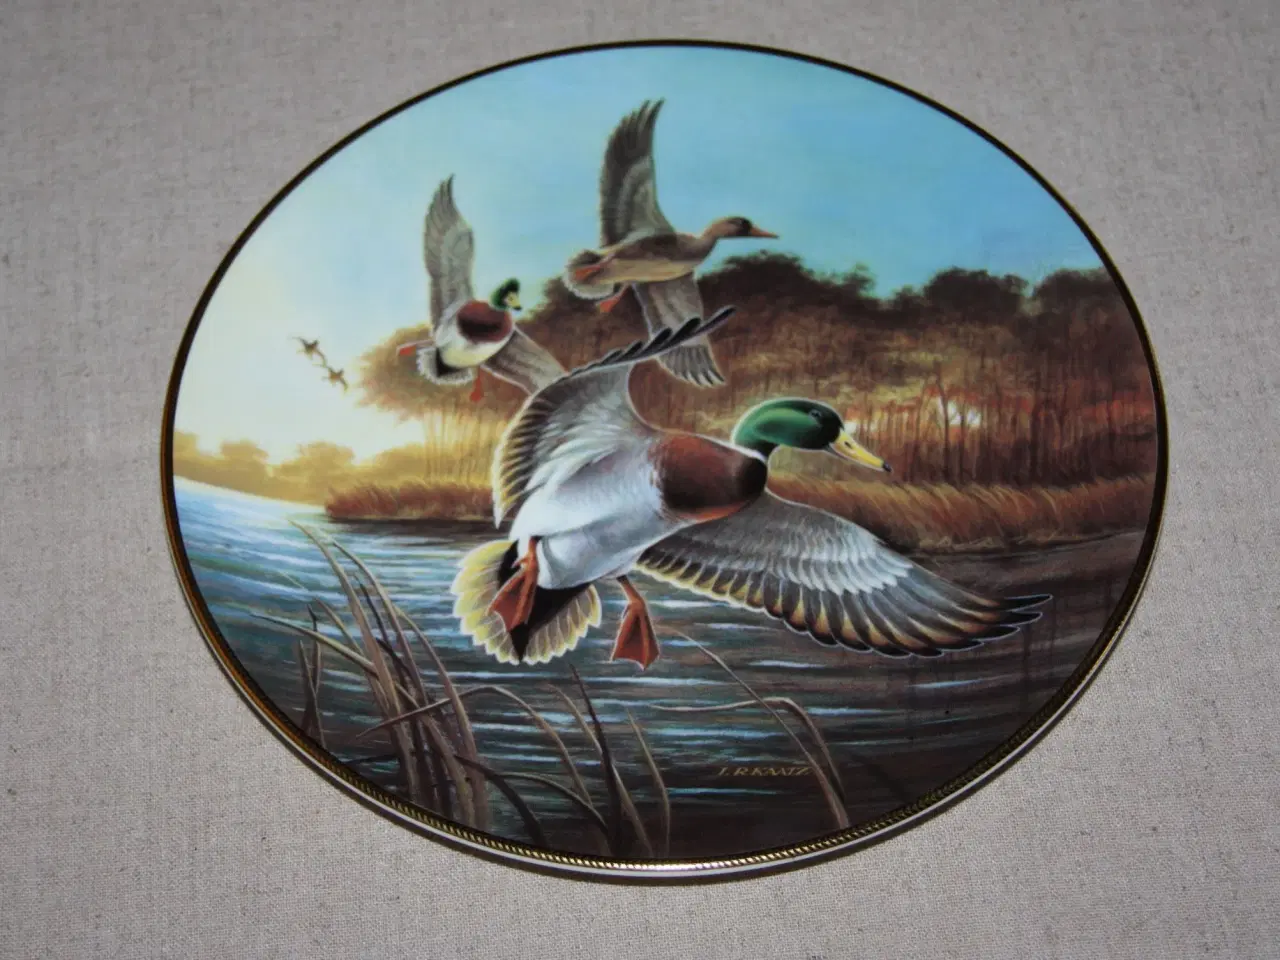 Billede 1 - The Ducks Unlimited Collection